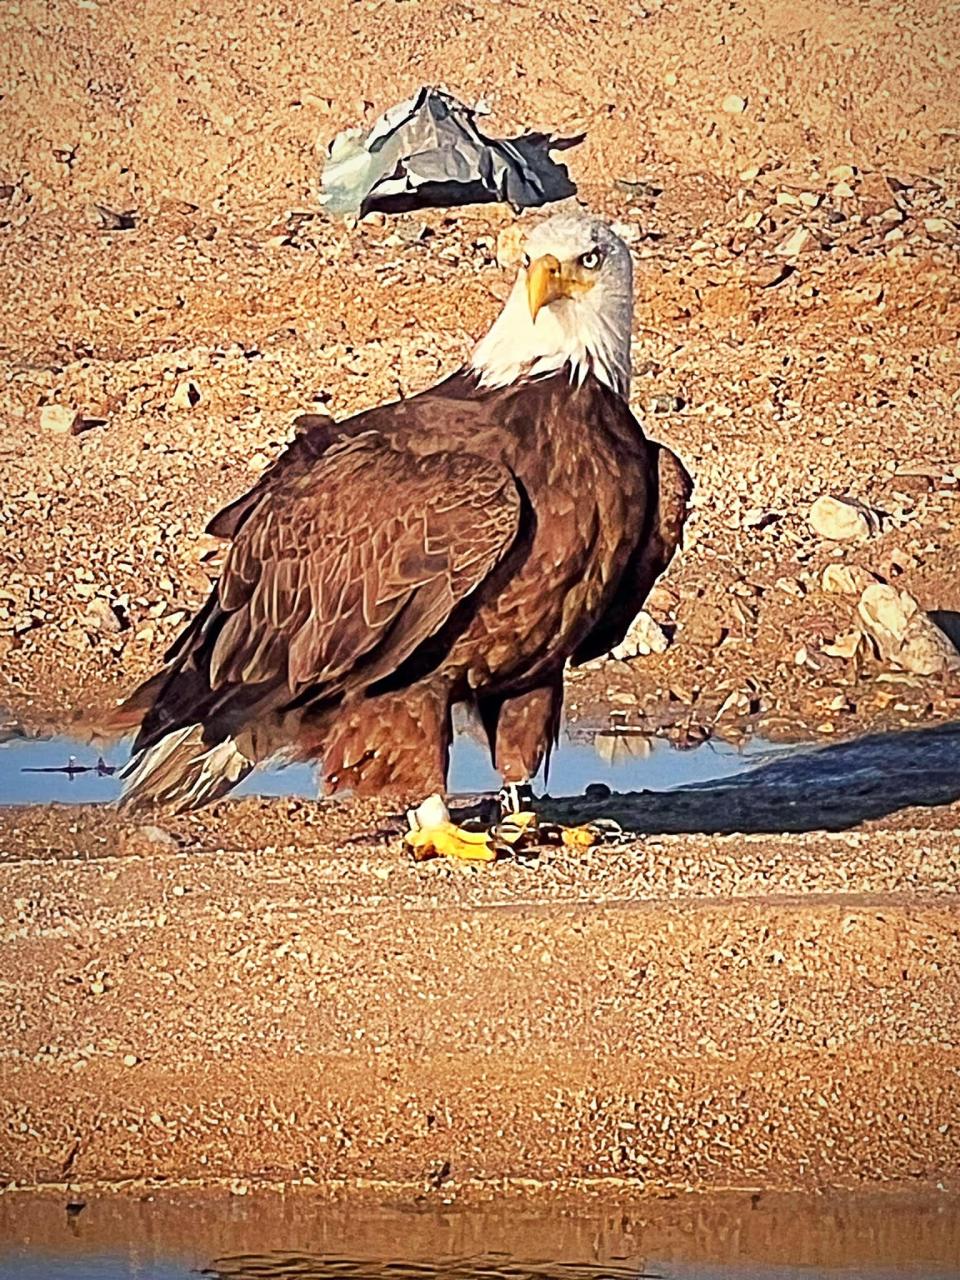 A photo of the bald eagle that Heather Wilkinson captured during a run with her dogs along the Mojave River bottom.